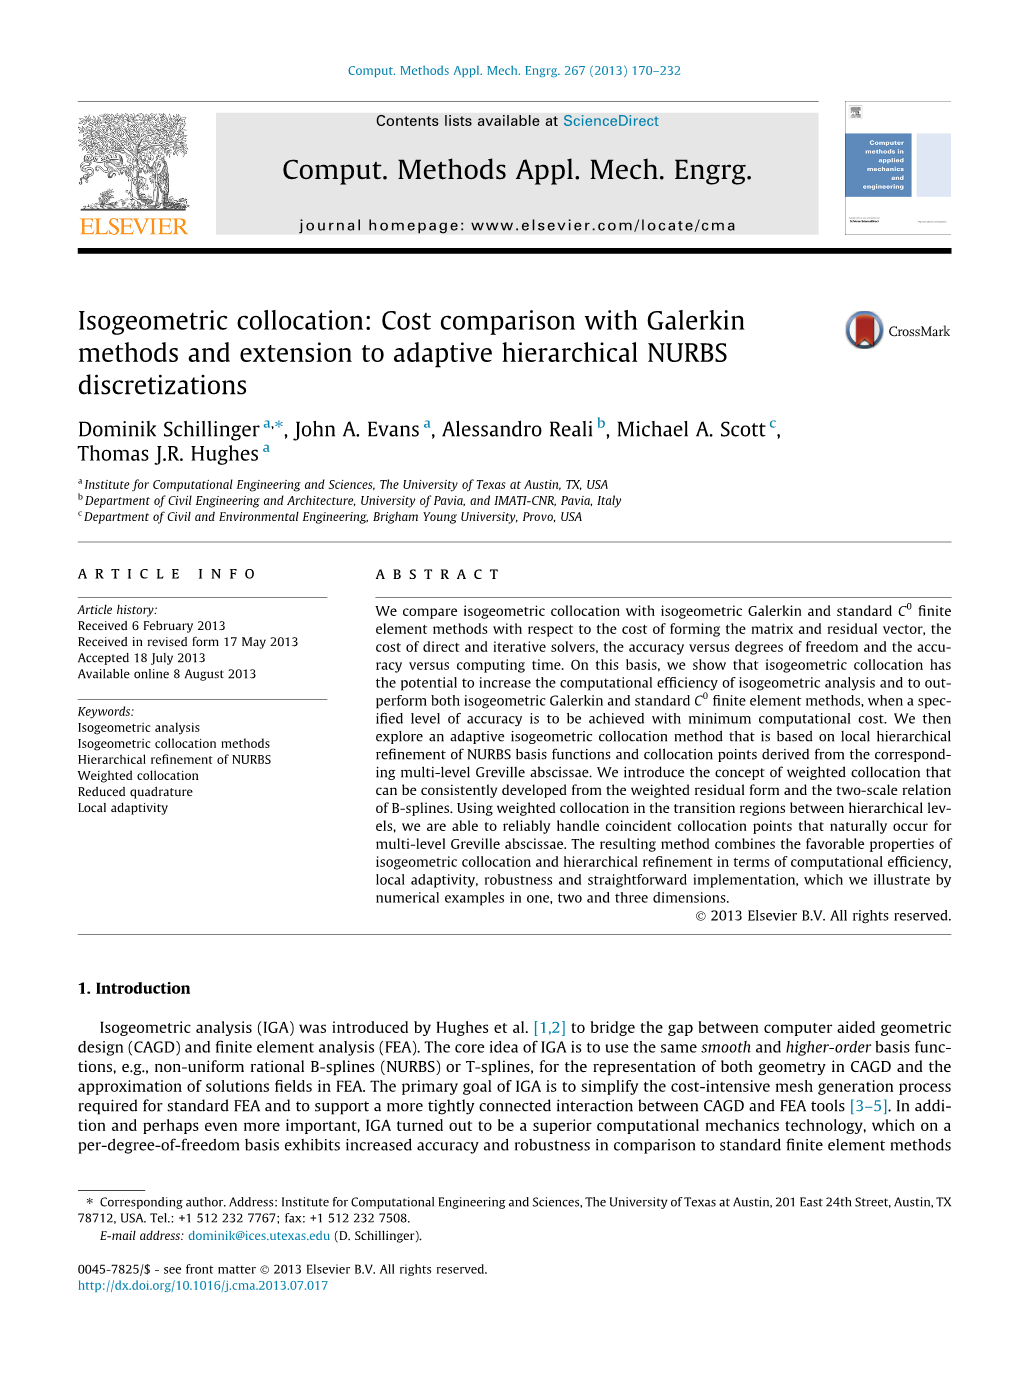 Isogeometric Collocation: Cost Comparison with Galerkin Methods and Extension to Adaptive Hierarchical NURBS Discretizations ⇑ Dominik Schillinger A, , John A